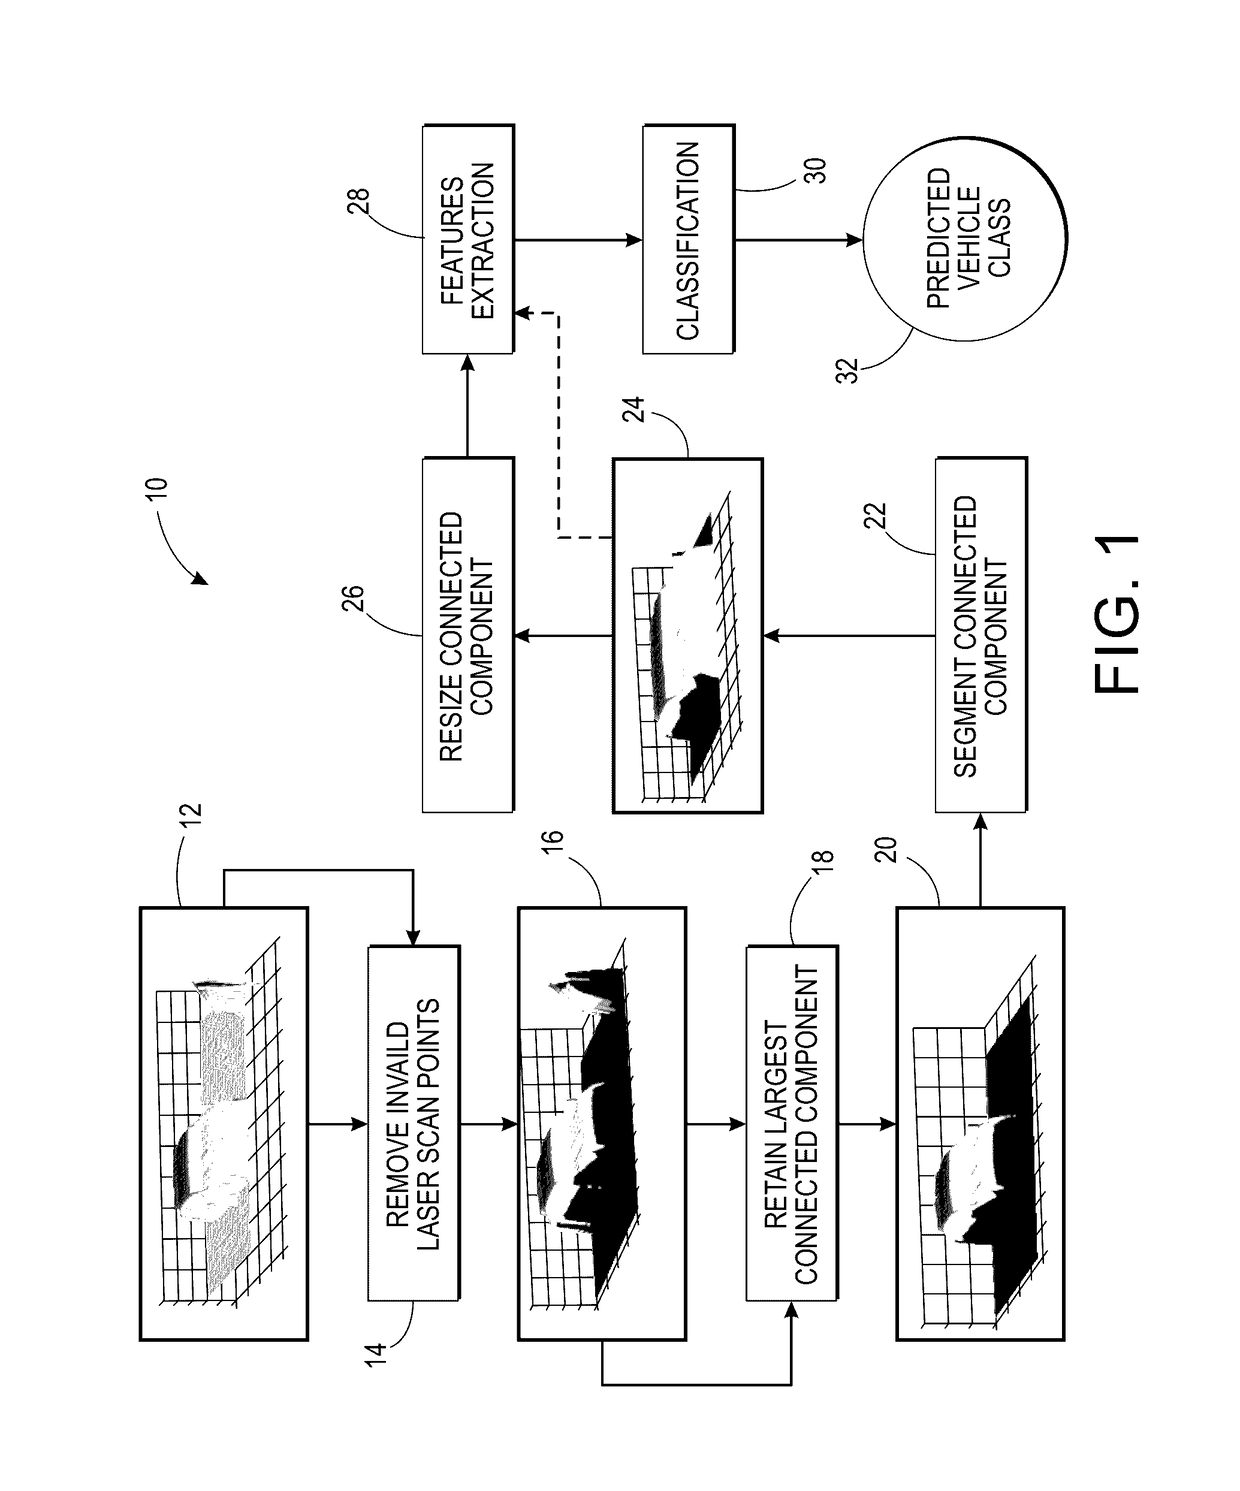 Vehicle classification from laser scanners using fisher and profile signatures